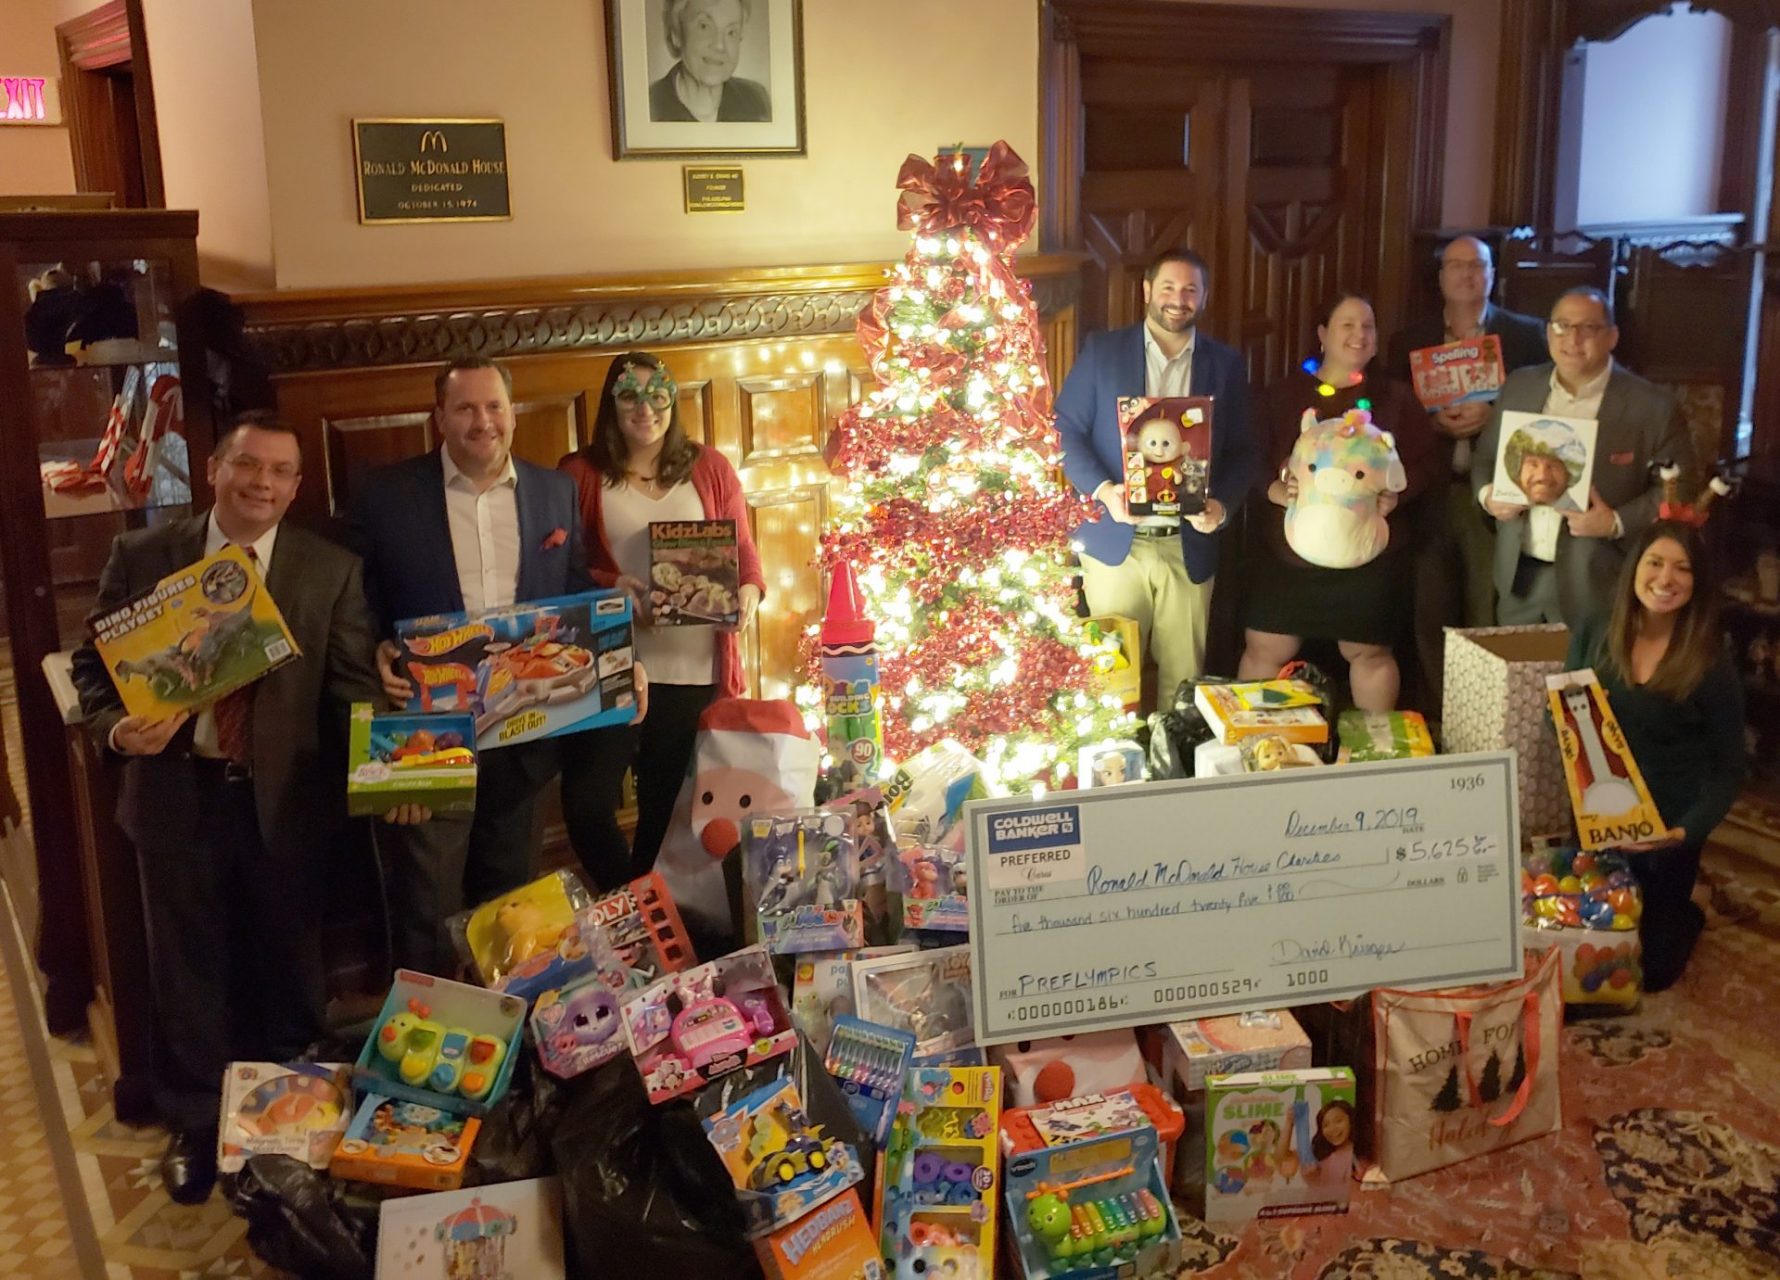 Coldwell Banker Preferred employees with items collected in fundraiser